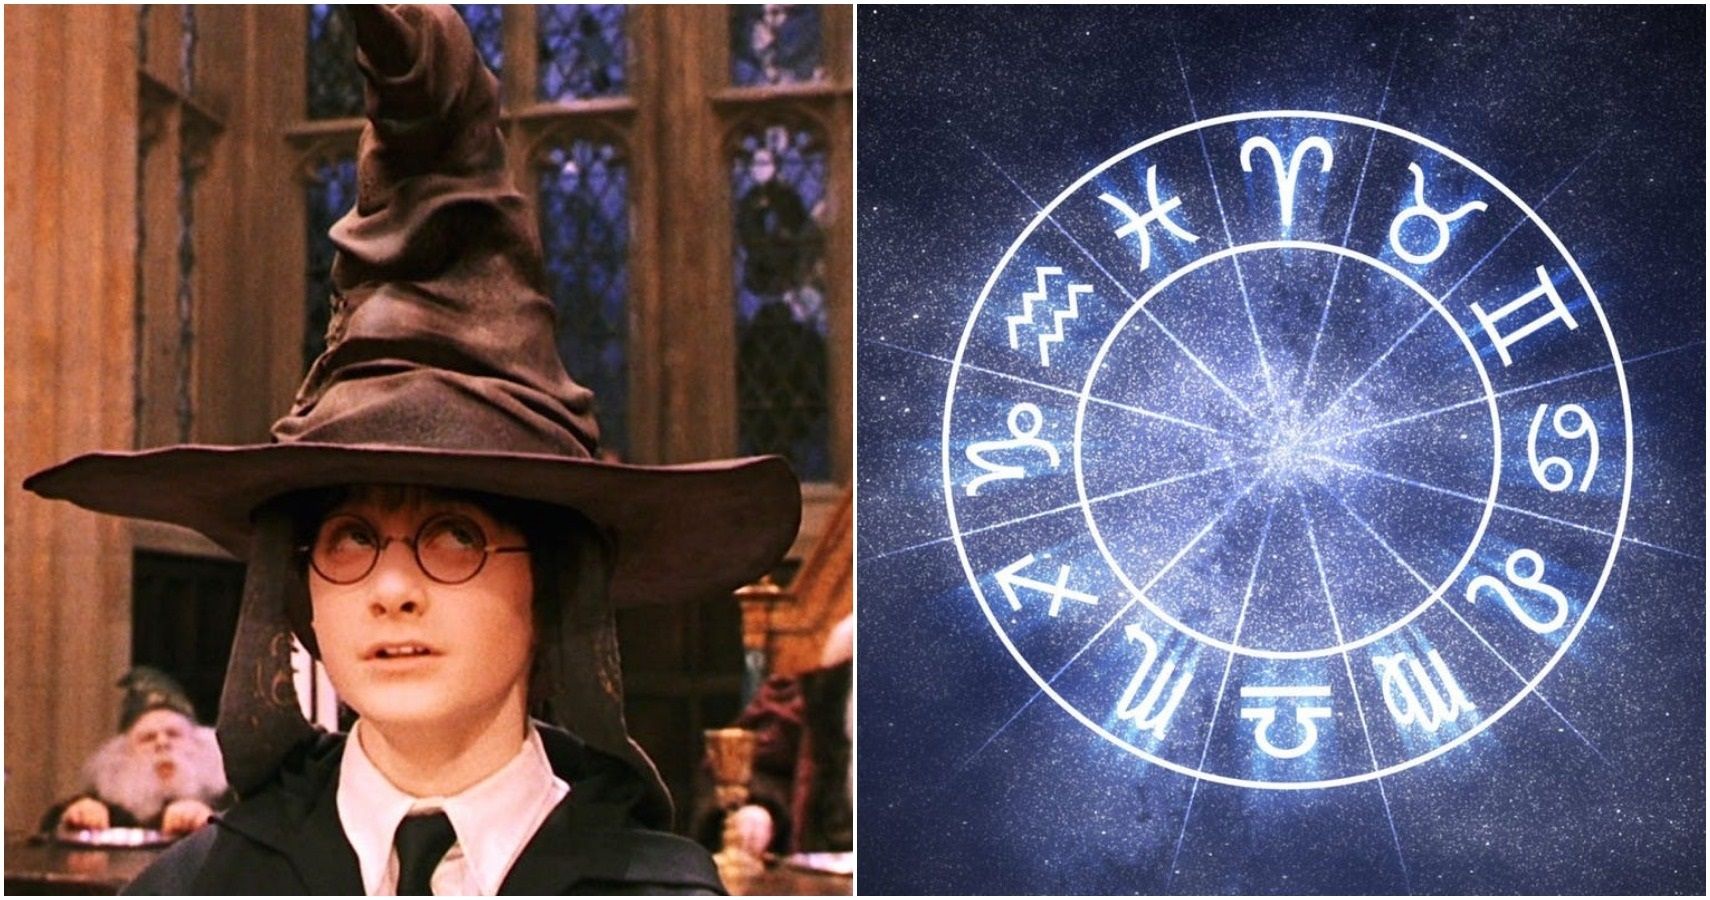 Which 'Harry Potter' Hogwarts House You're in, Based on Your Sign